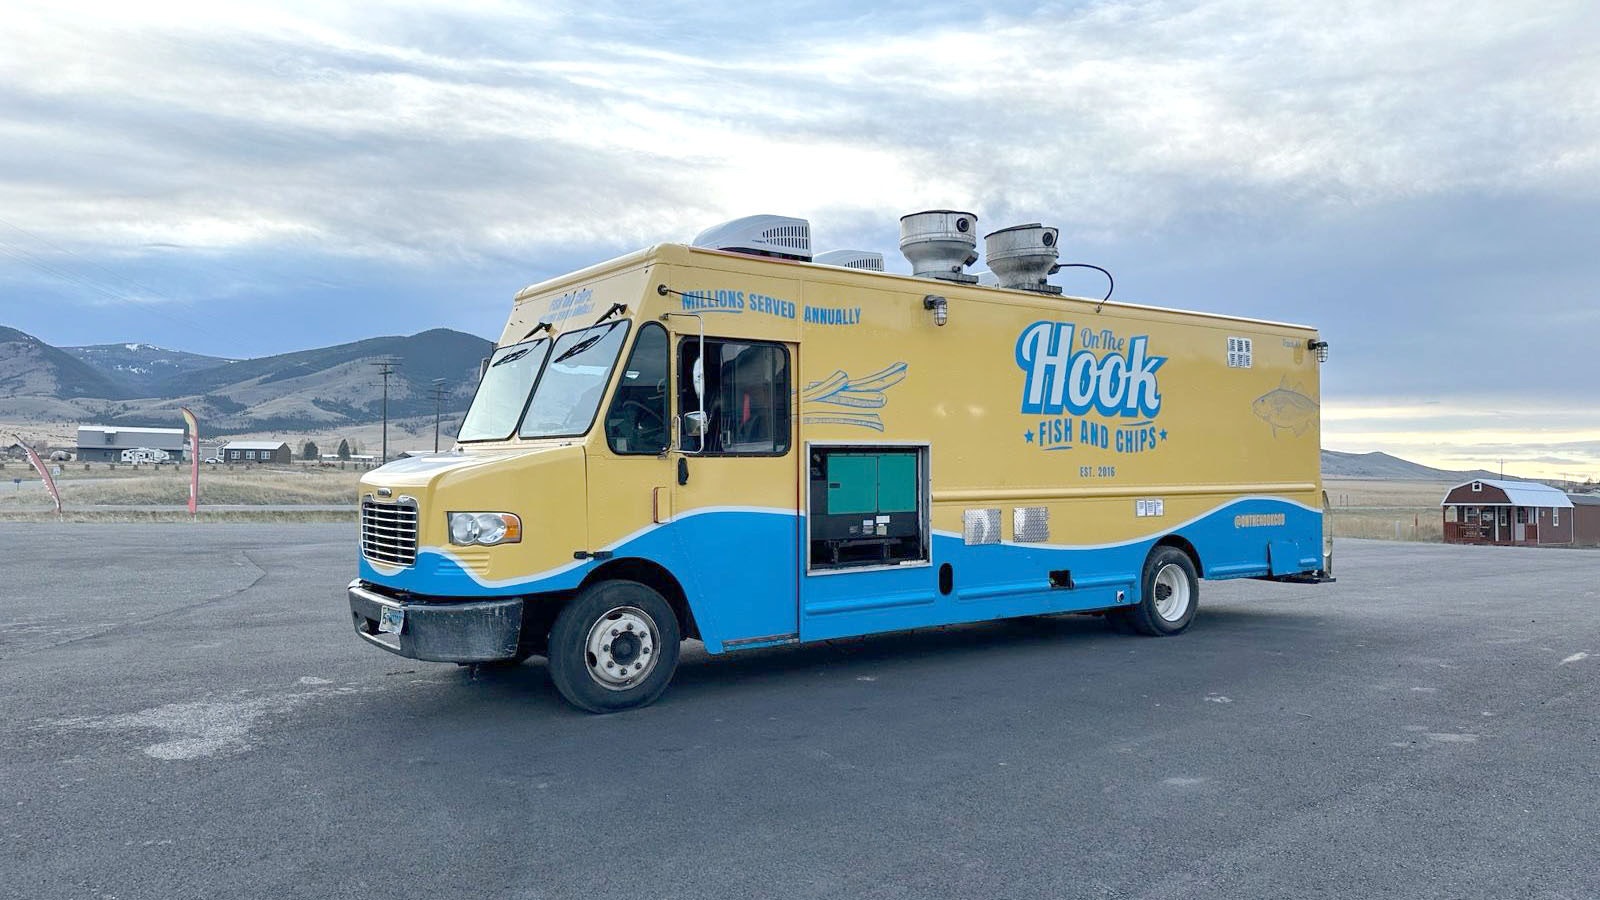 The new look On the Hook Fish and Chips truck.